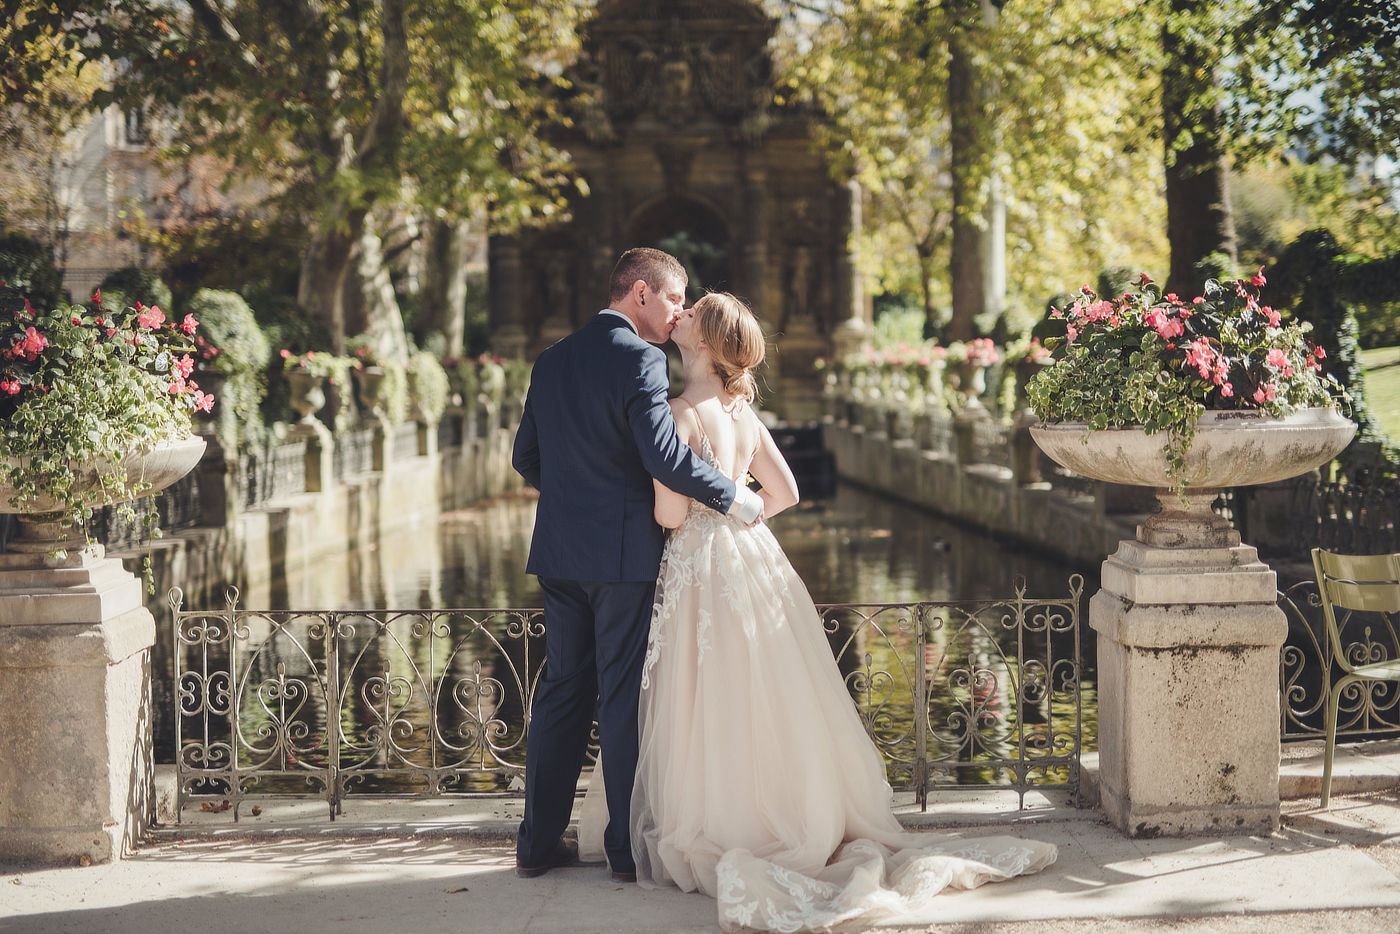 Bride and groom kiss at the Medici fountain in Luxembourg garden in Paris